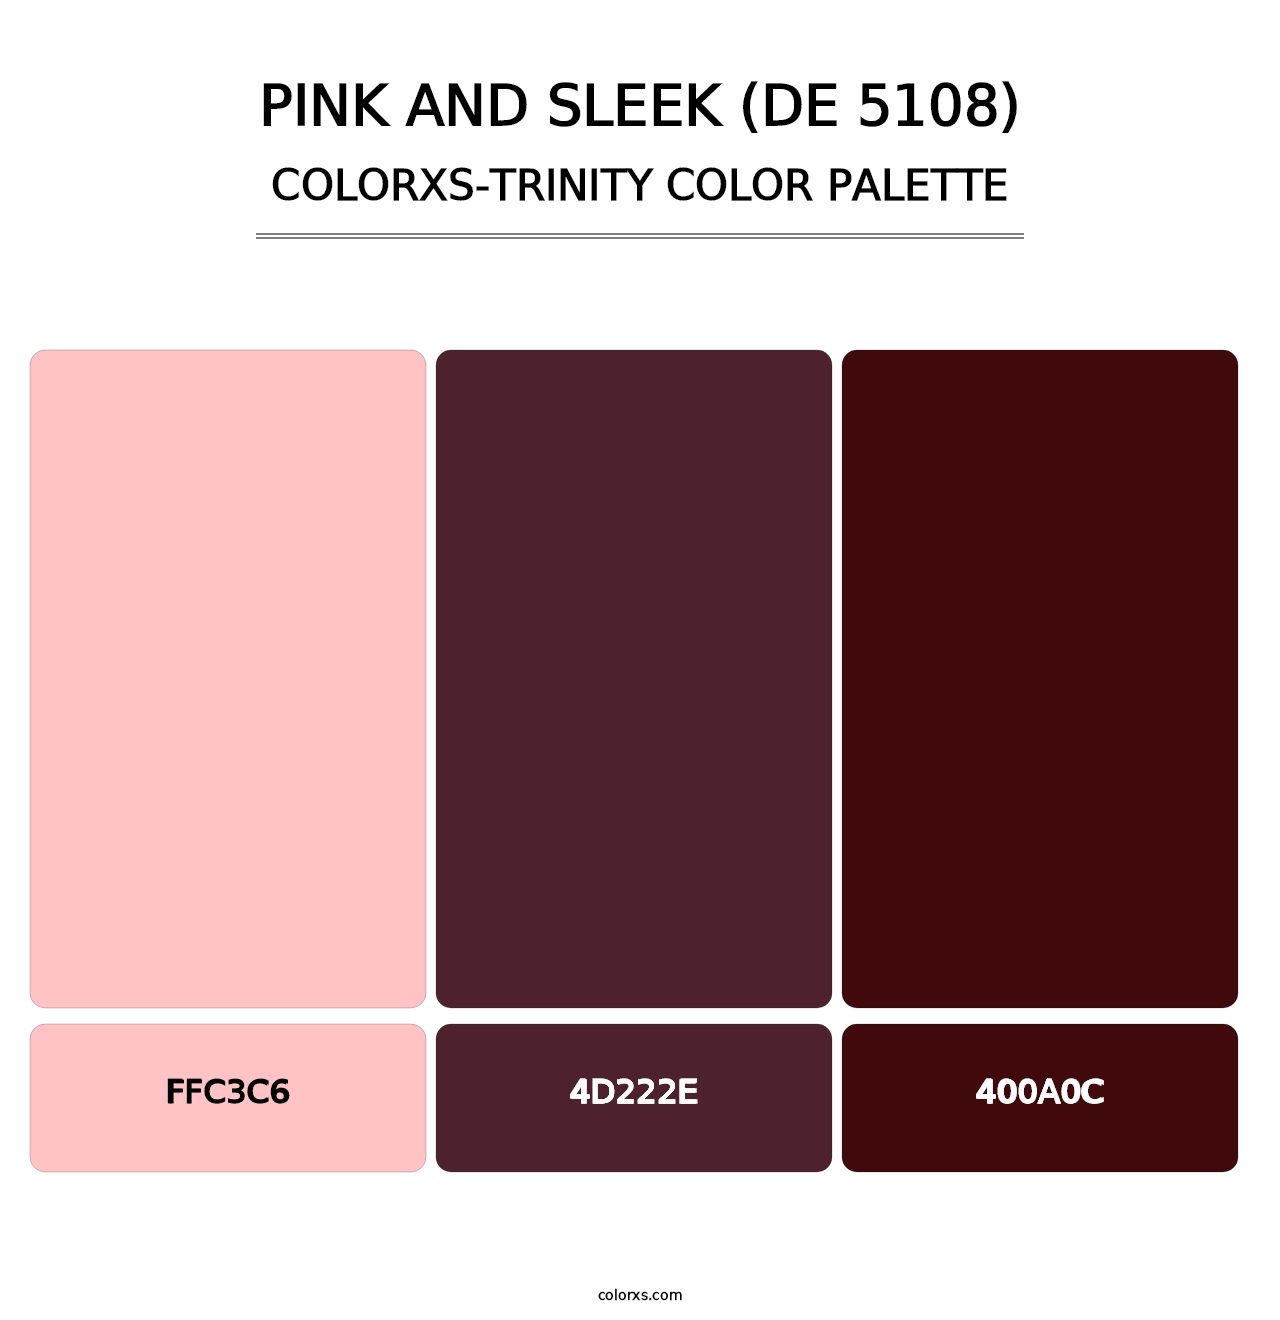 Pink and Sleek (DE 5108) - Colorxs Trinity Palette